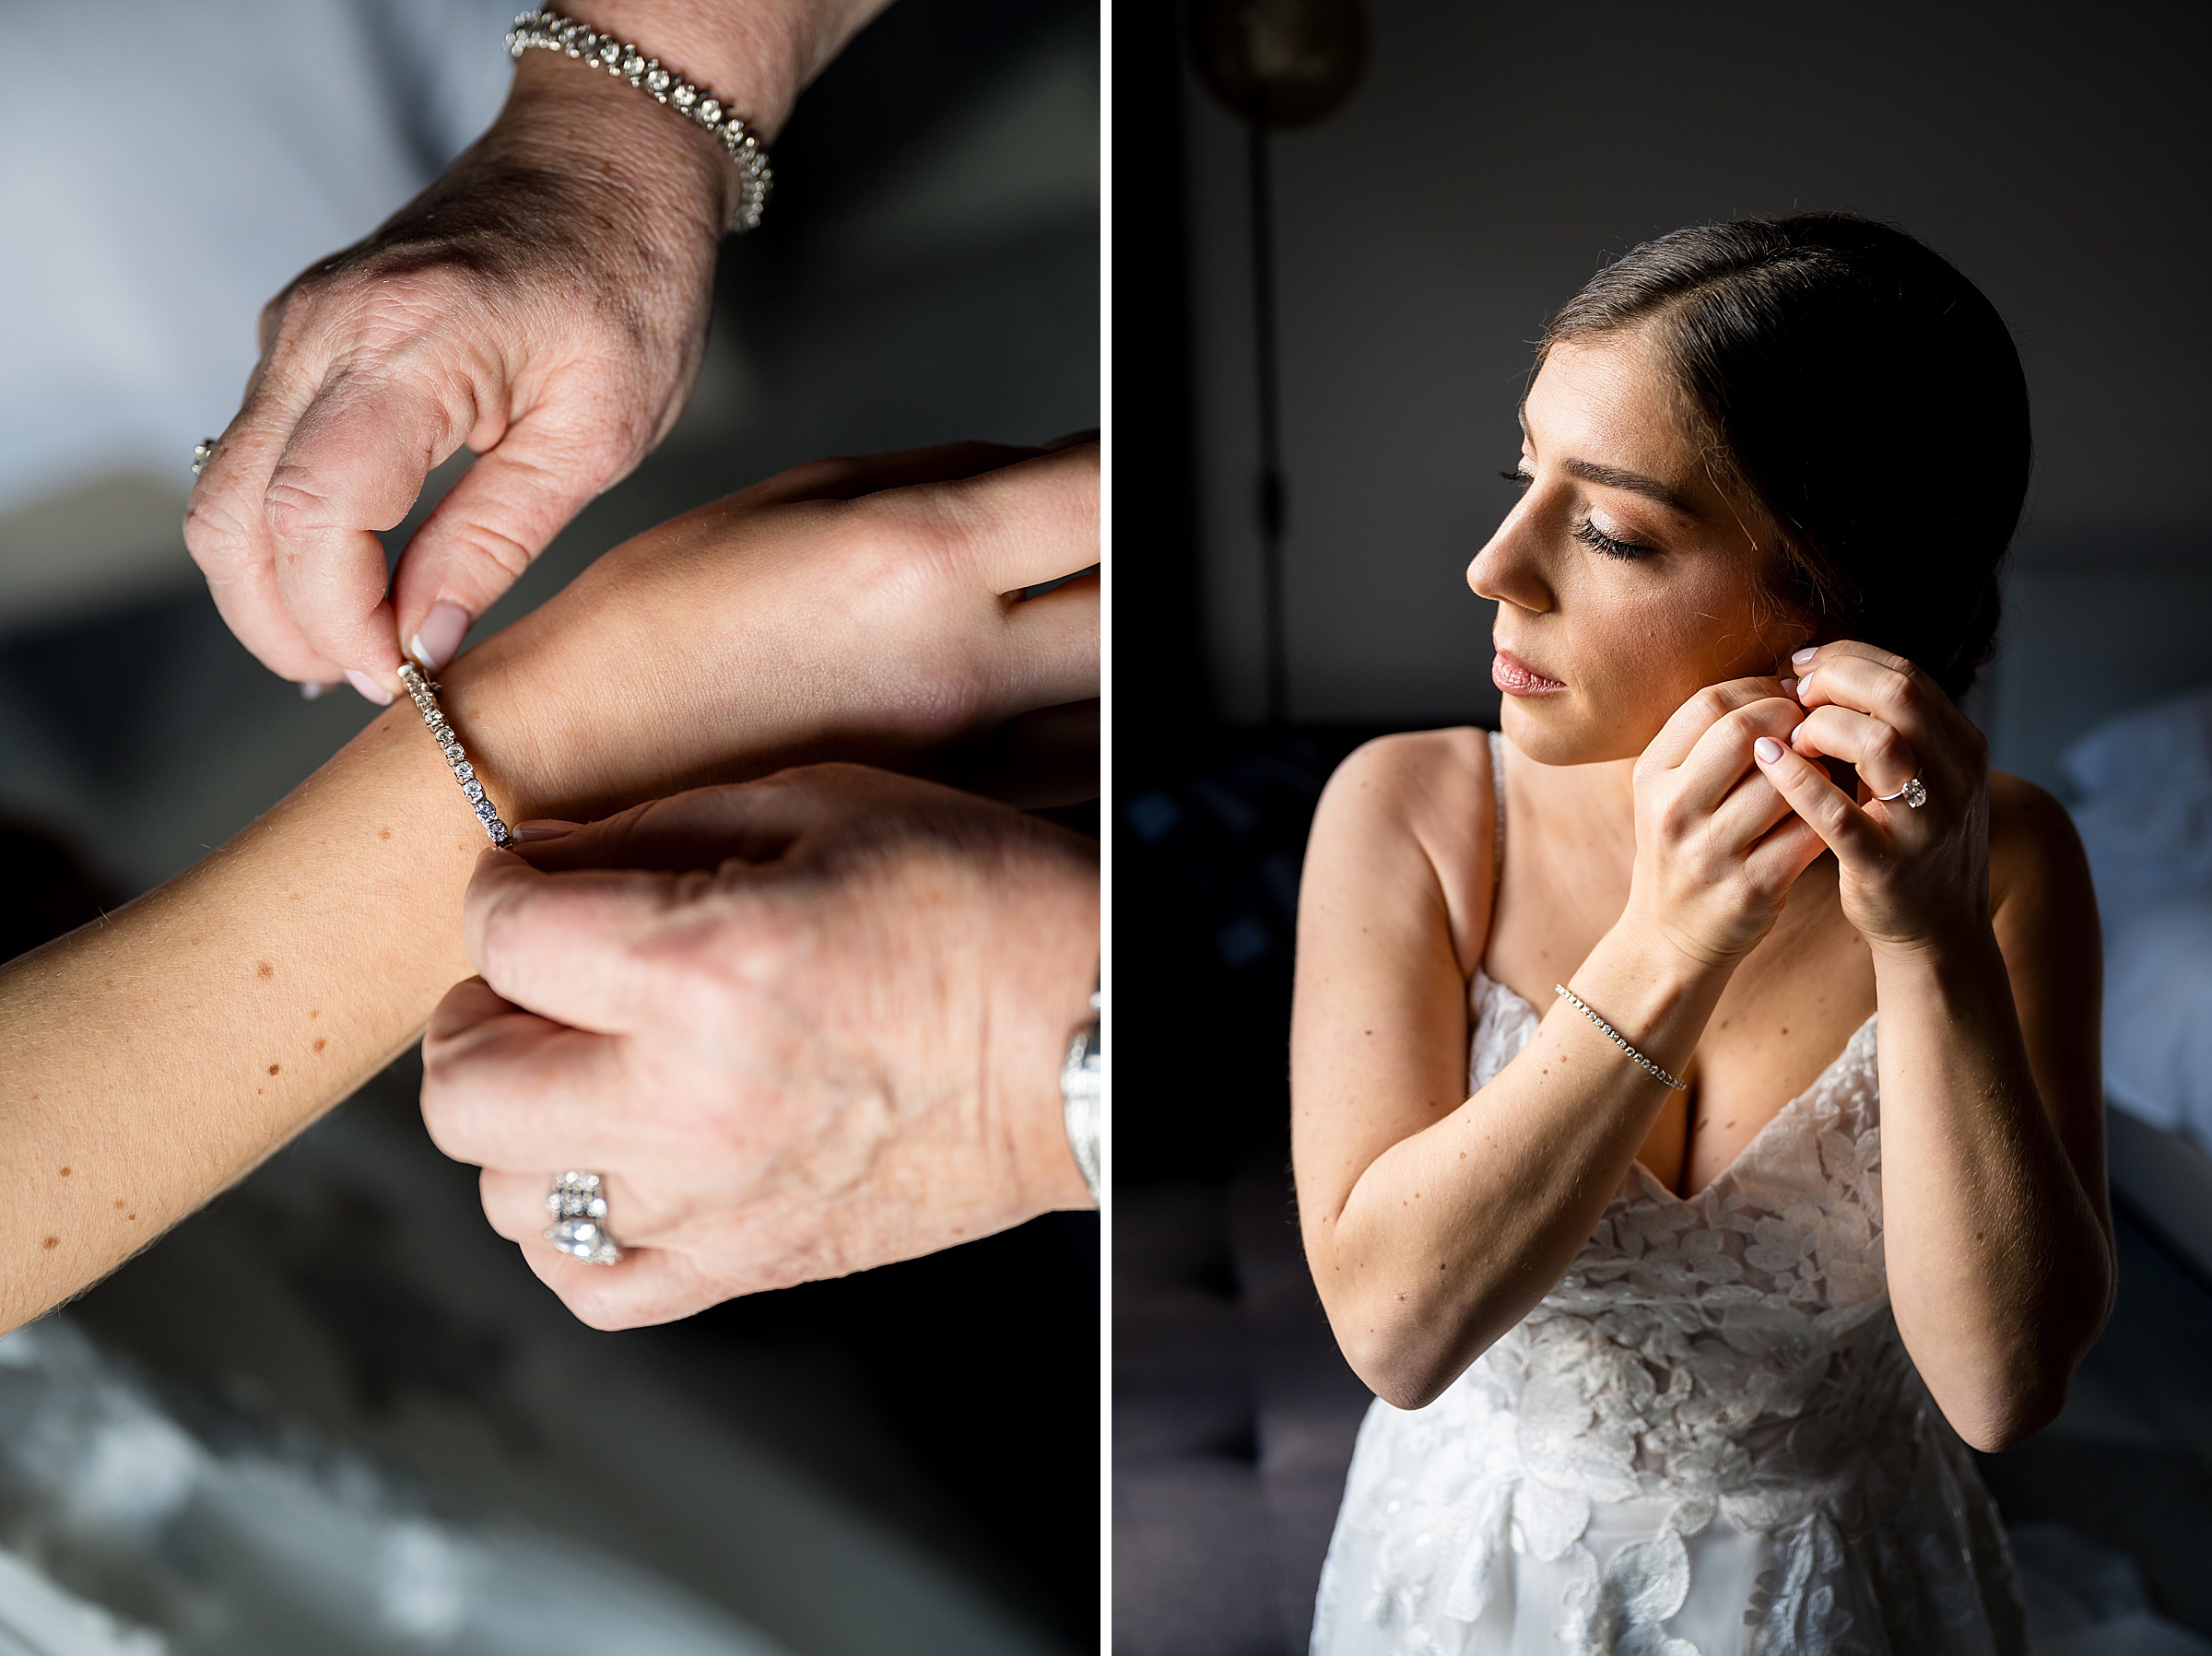 At a Lilah Events wedding, the bride delicately inserts her wedding ring onto her finger.